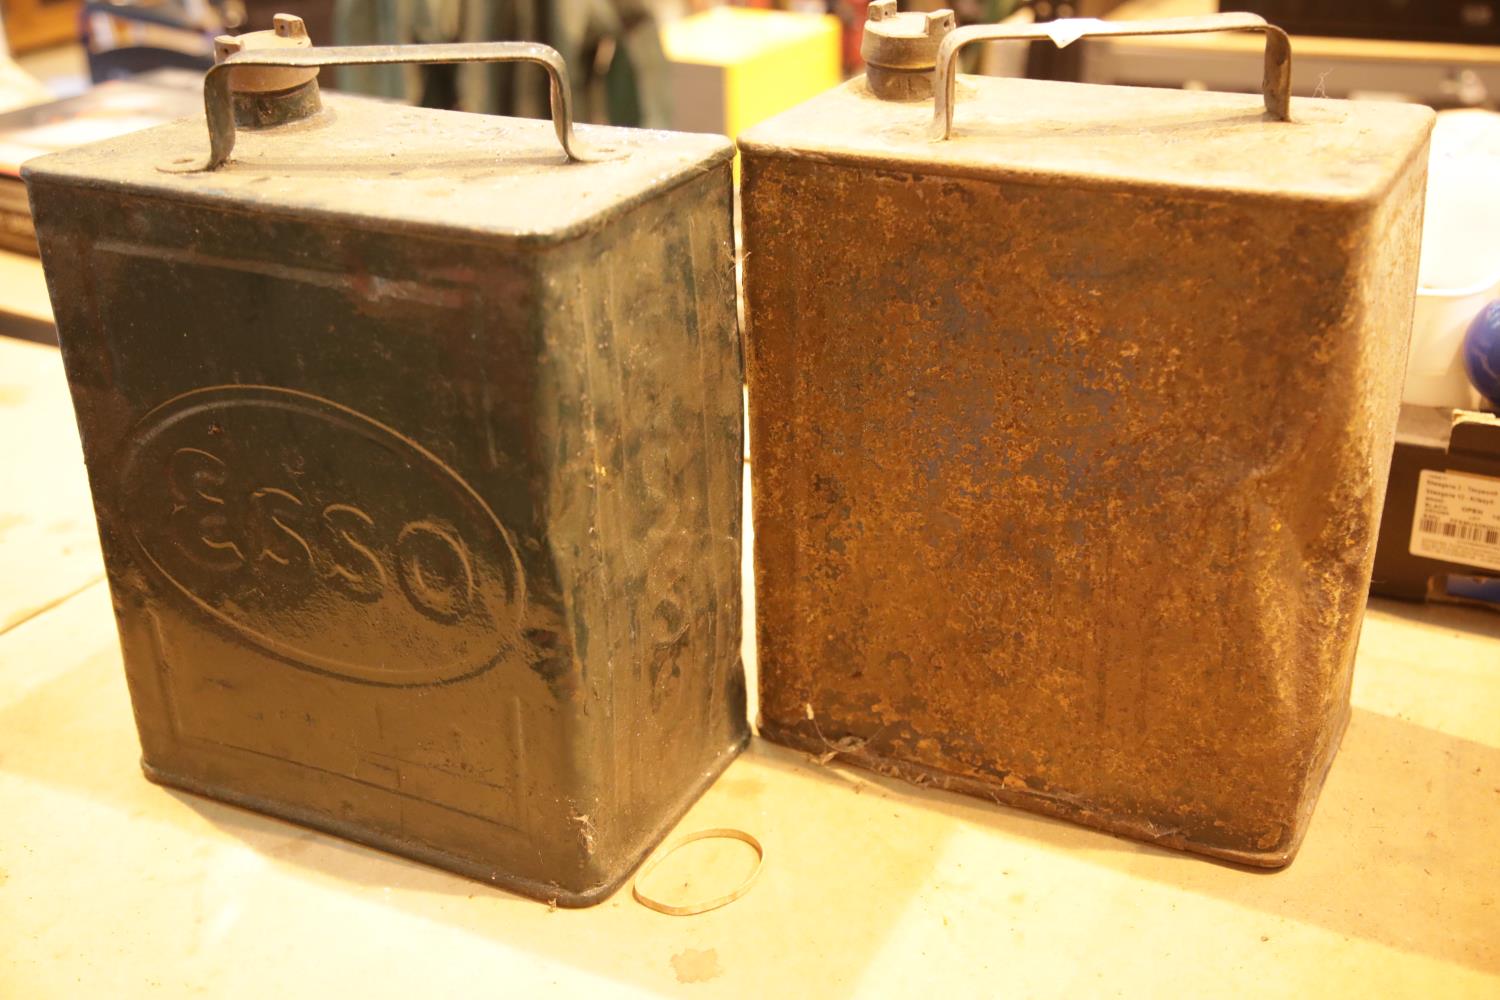 Two vintage petrol cans with brass tops, Esso and Light Shale Oil. This lot is not available for